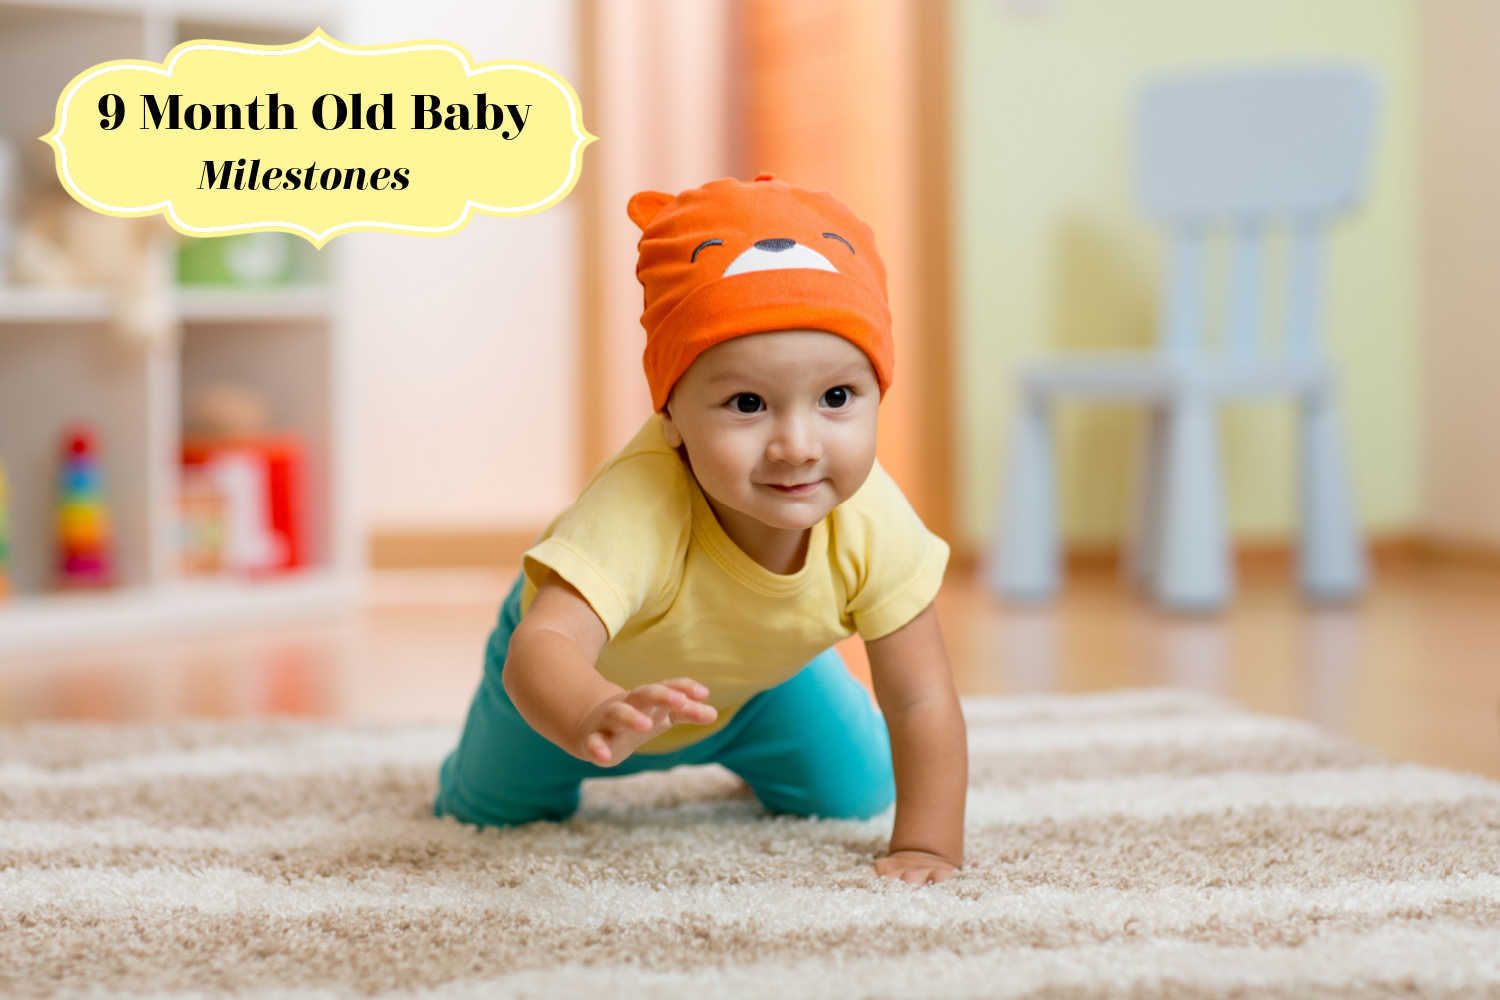 9 Month Old Baby Milestones – What Are They and How You Can Help